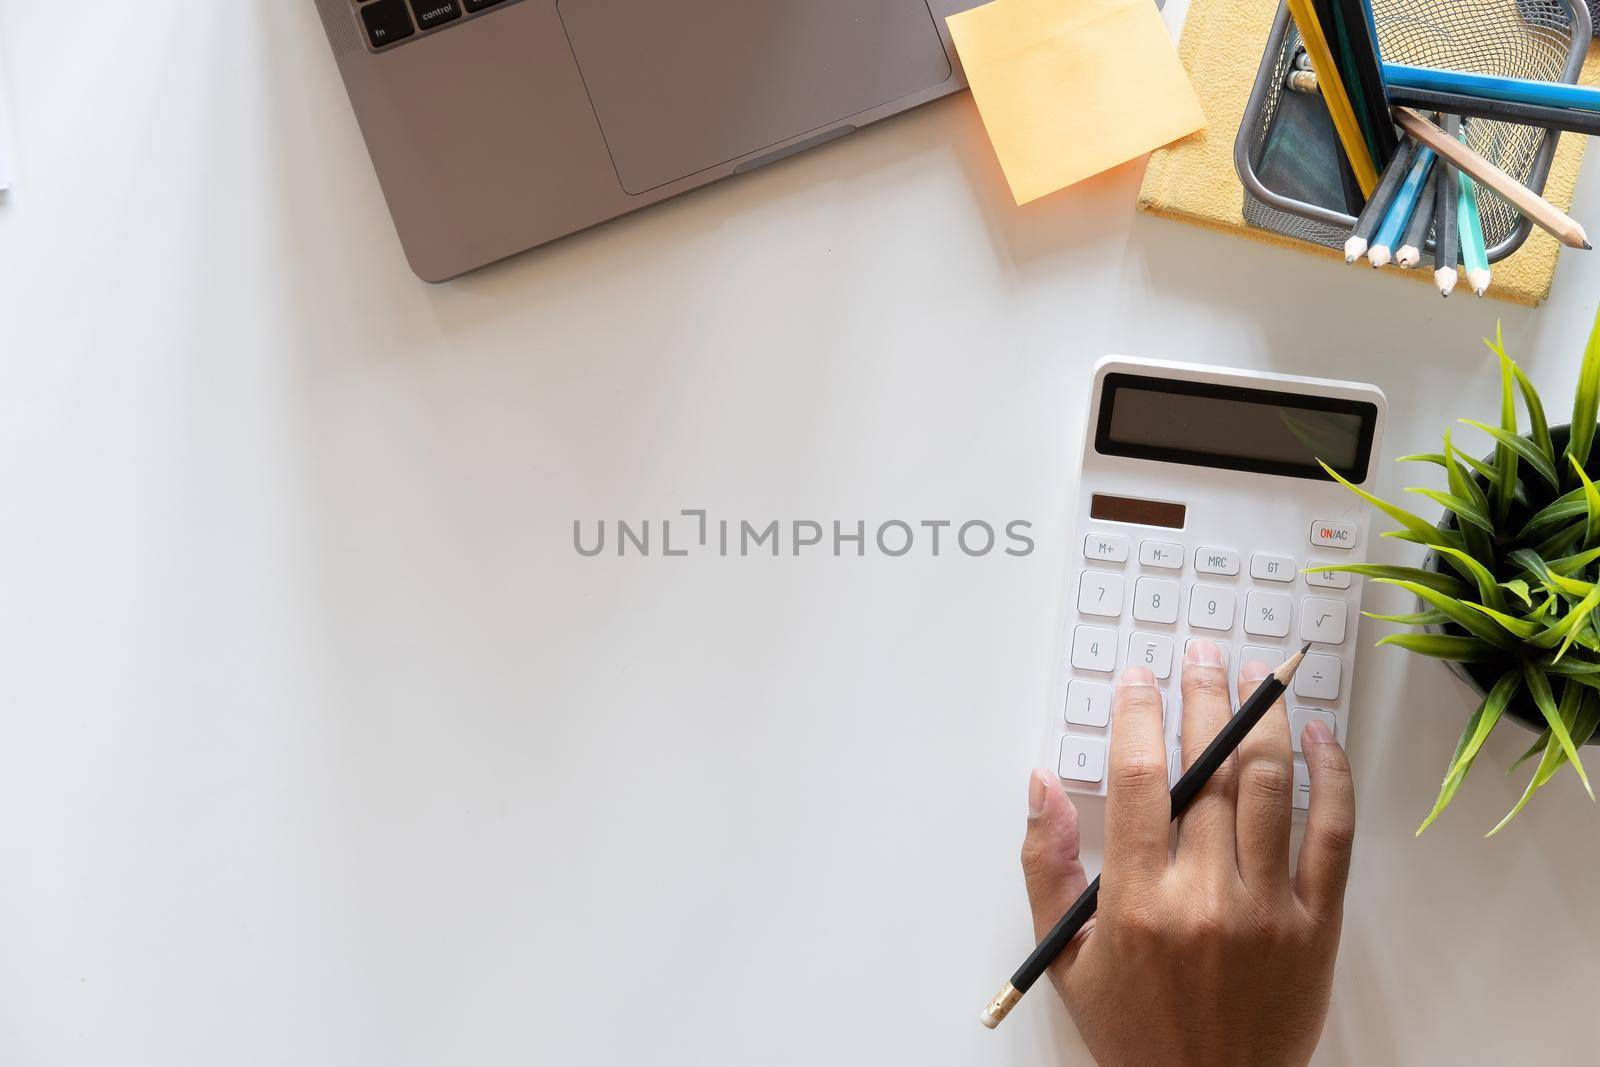 Top view hand of accountant using calculator on workplace with copy space, calculator and plant potted on white desk background, Accounting workplace concept by nateemee